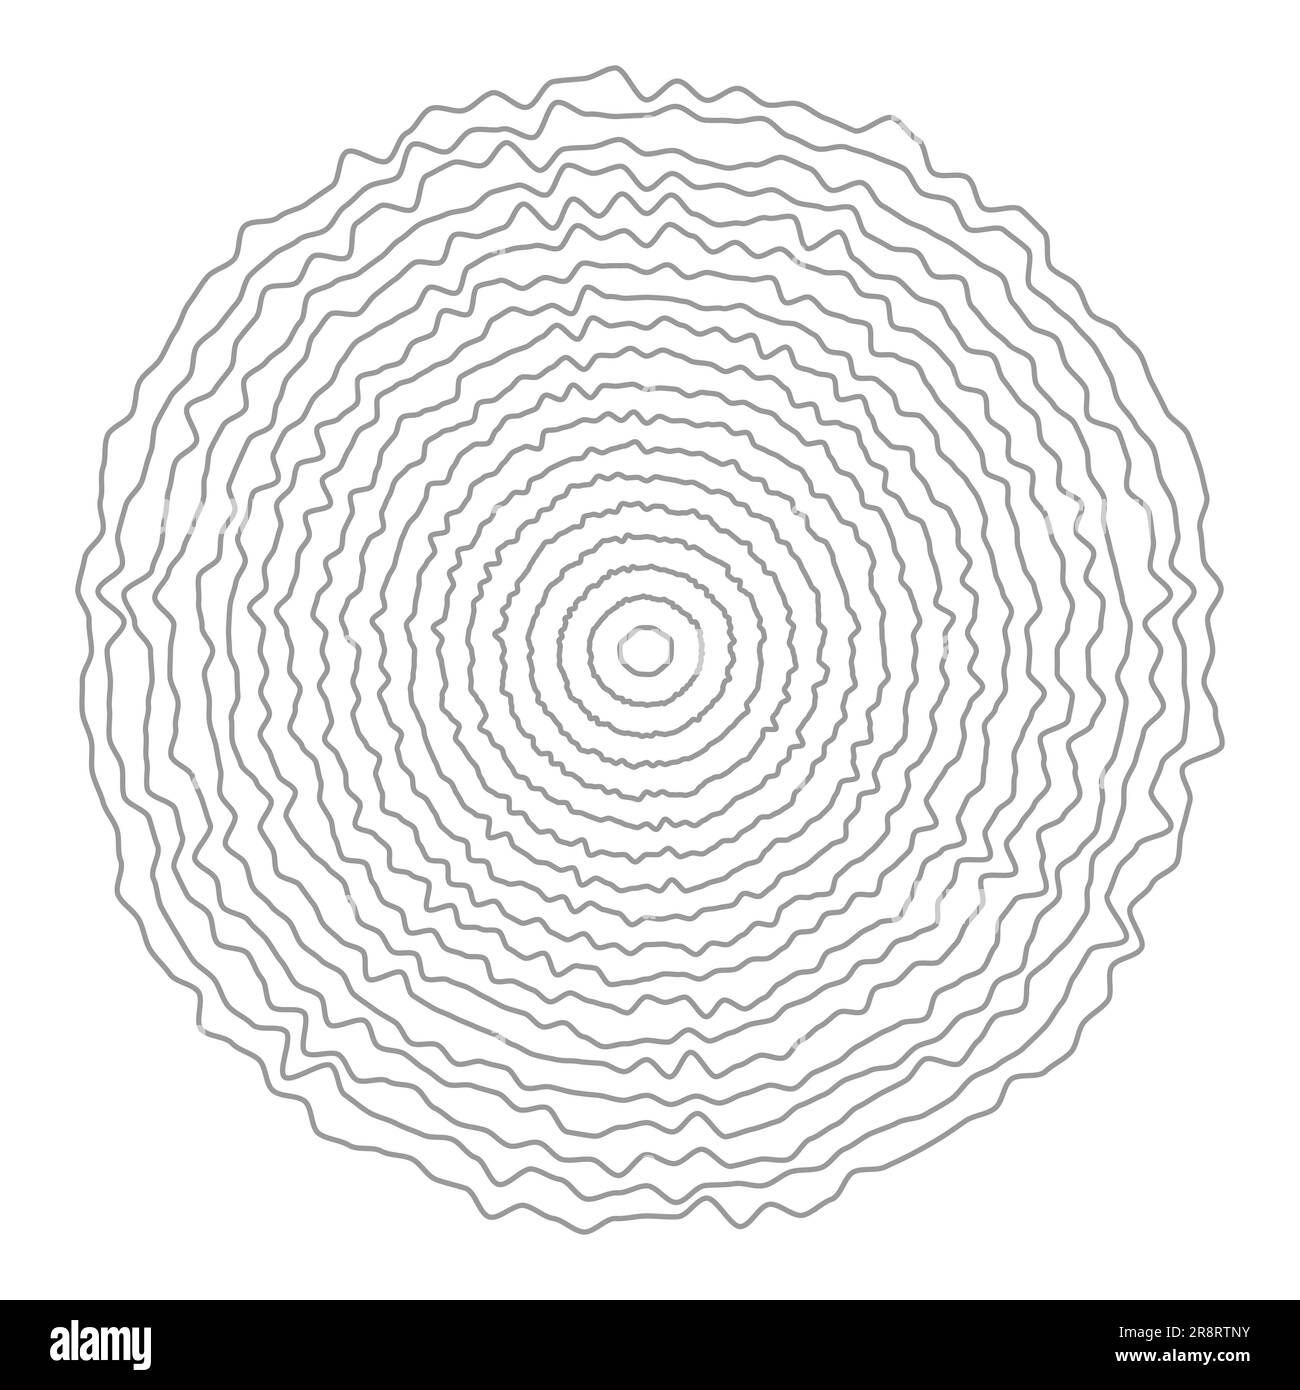 A circle with broken lines. Template for prints, backgrounds, decorations, interior design and creative ideas Stock Vector